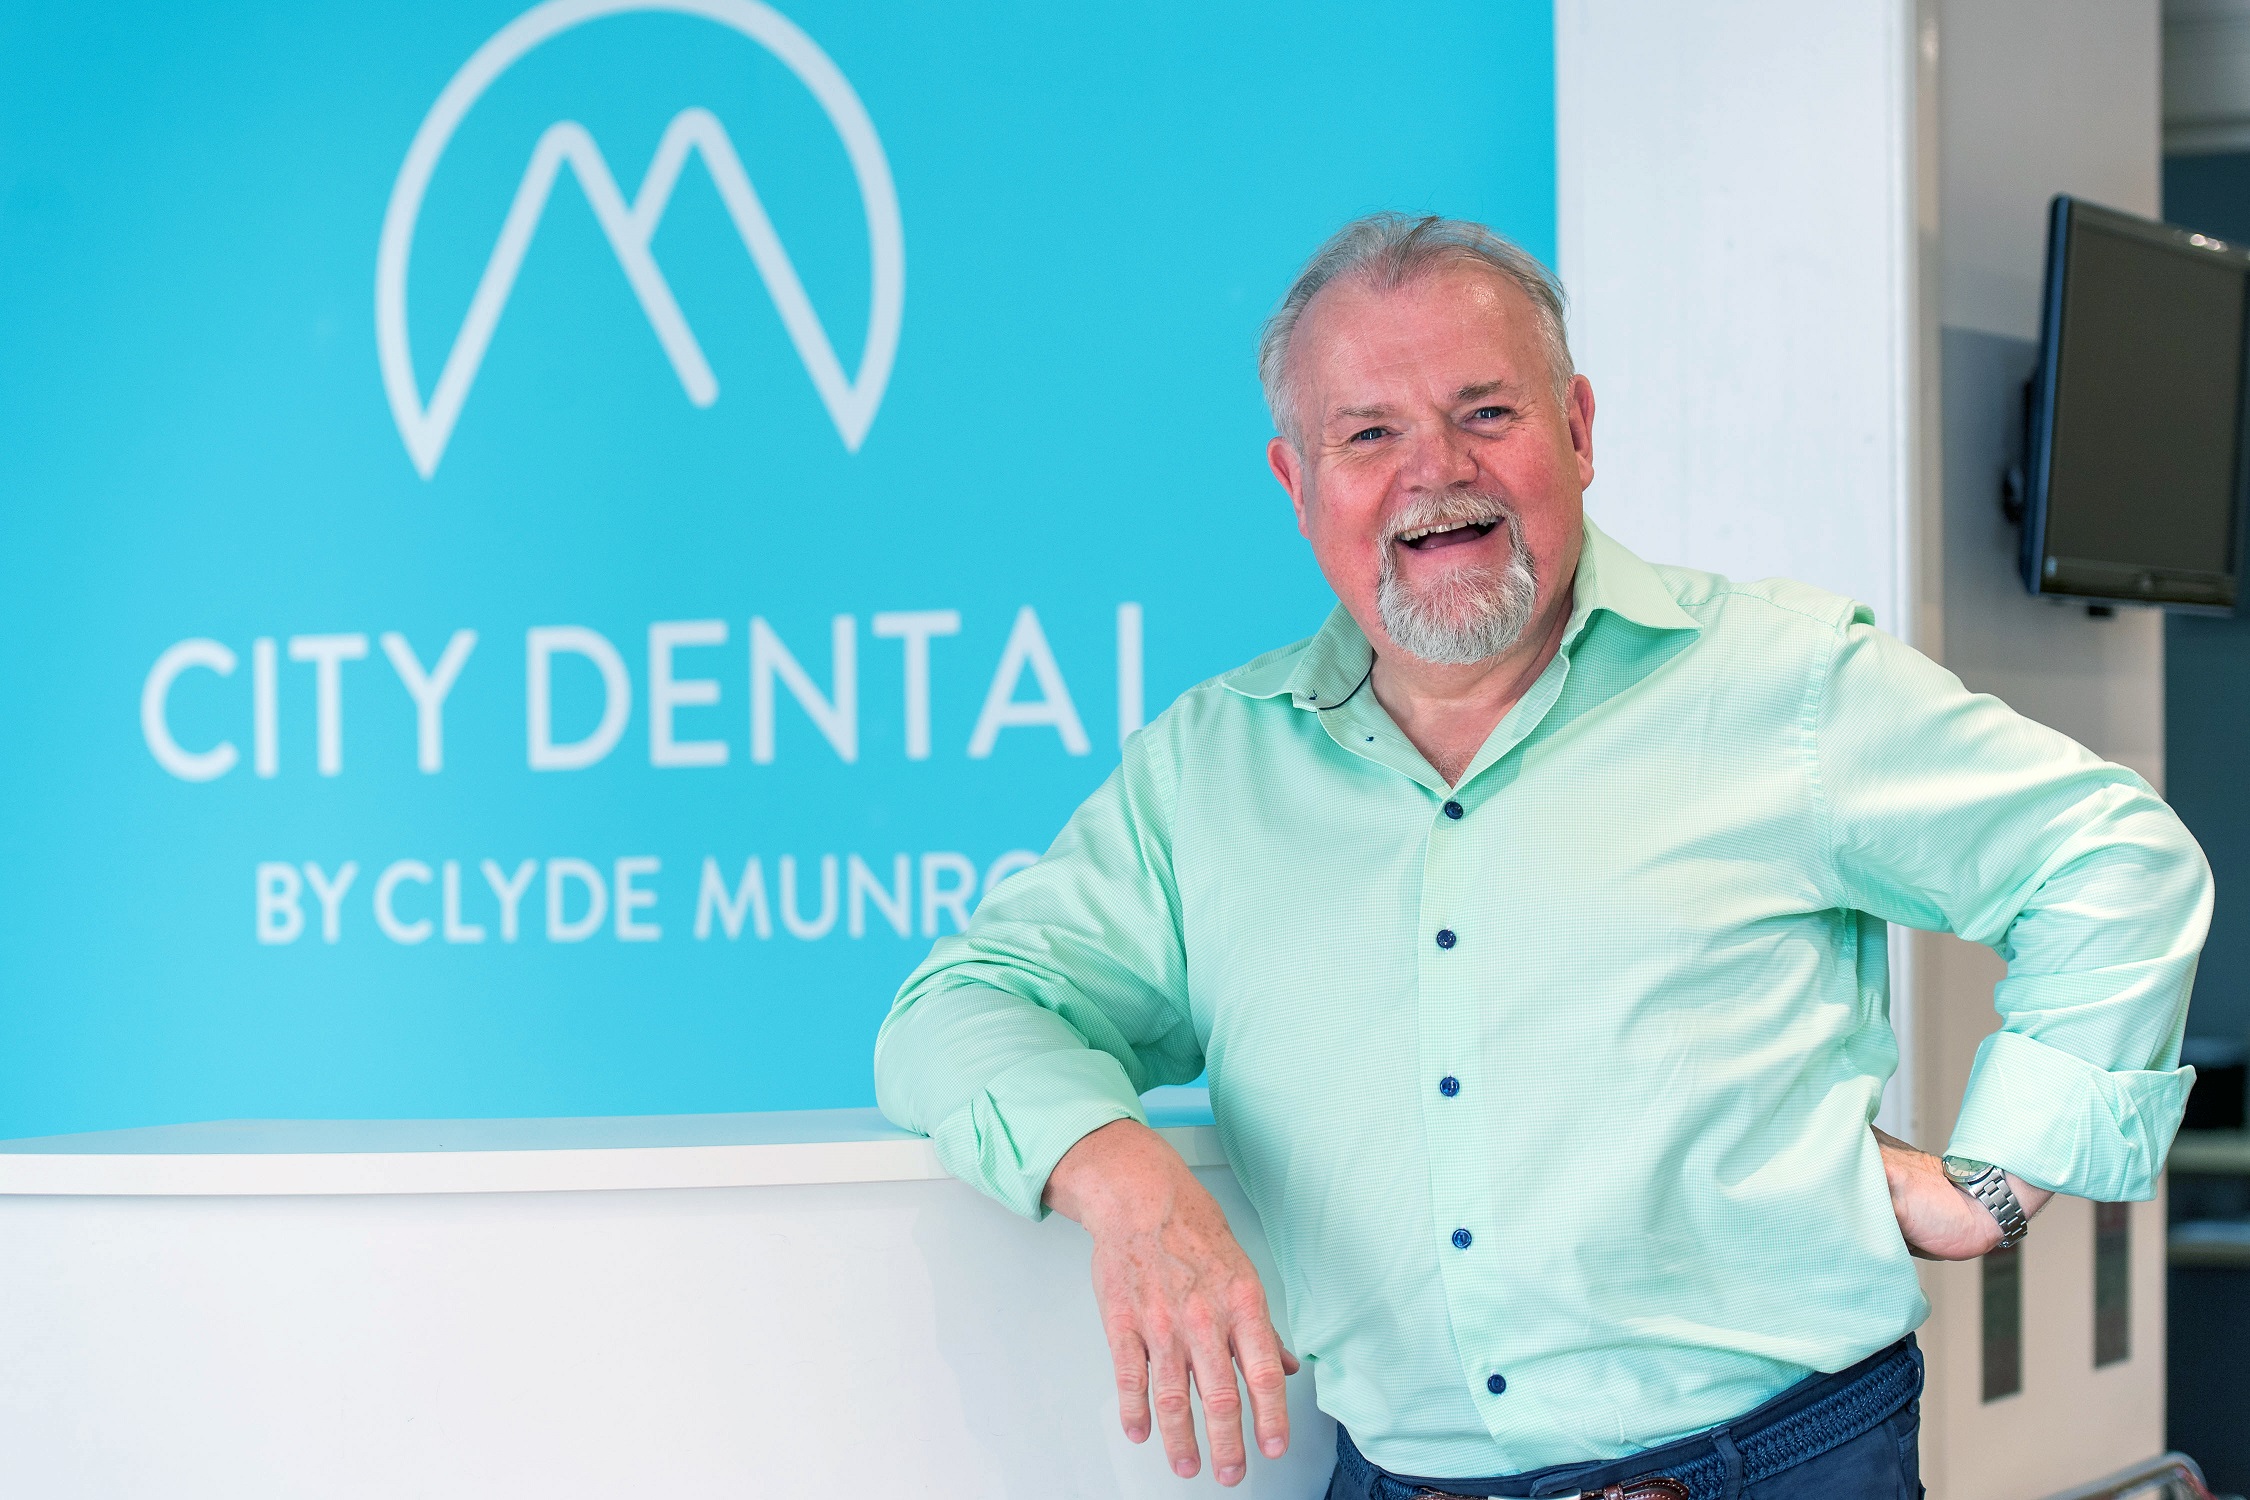 Clyde Munro plans new acquisitions after securing two new practices